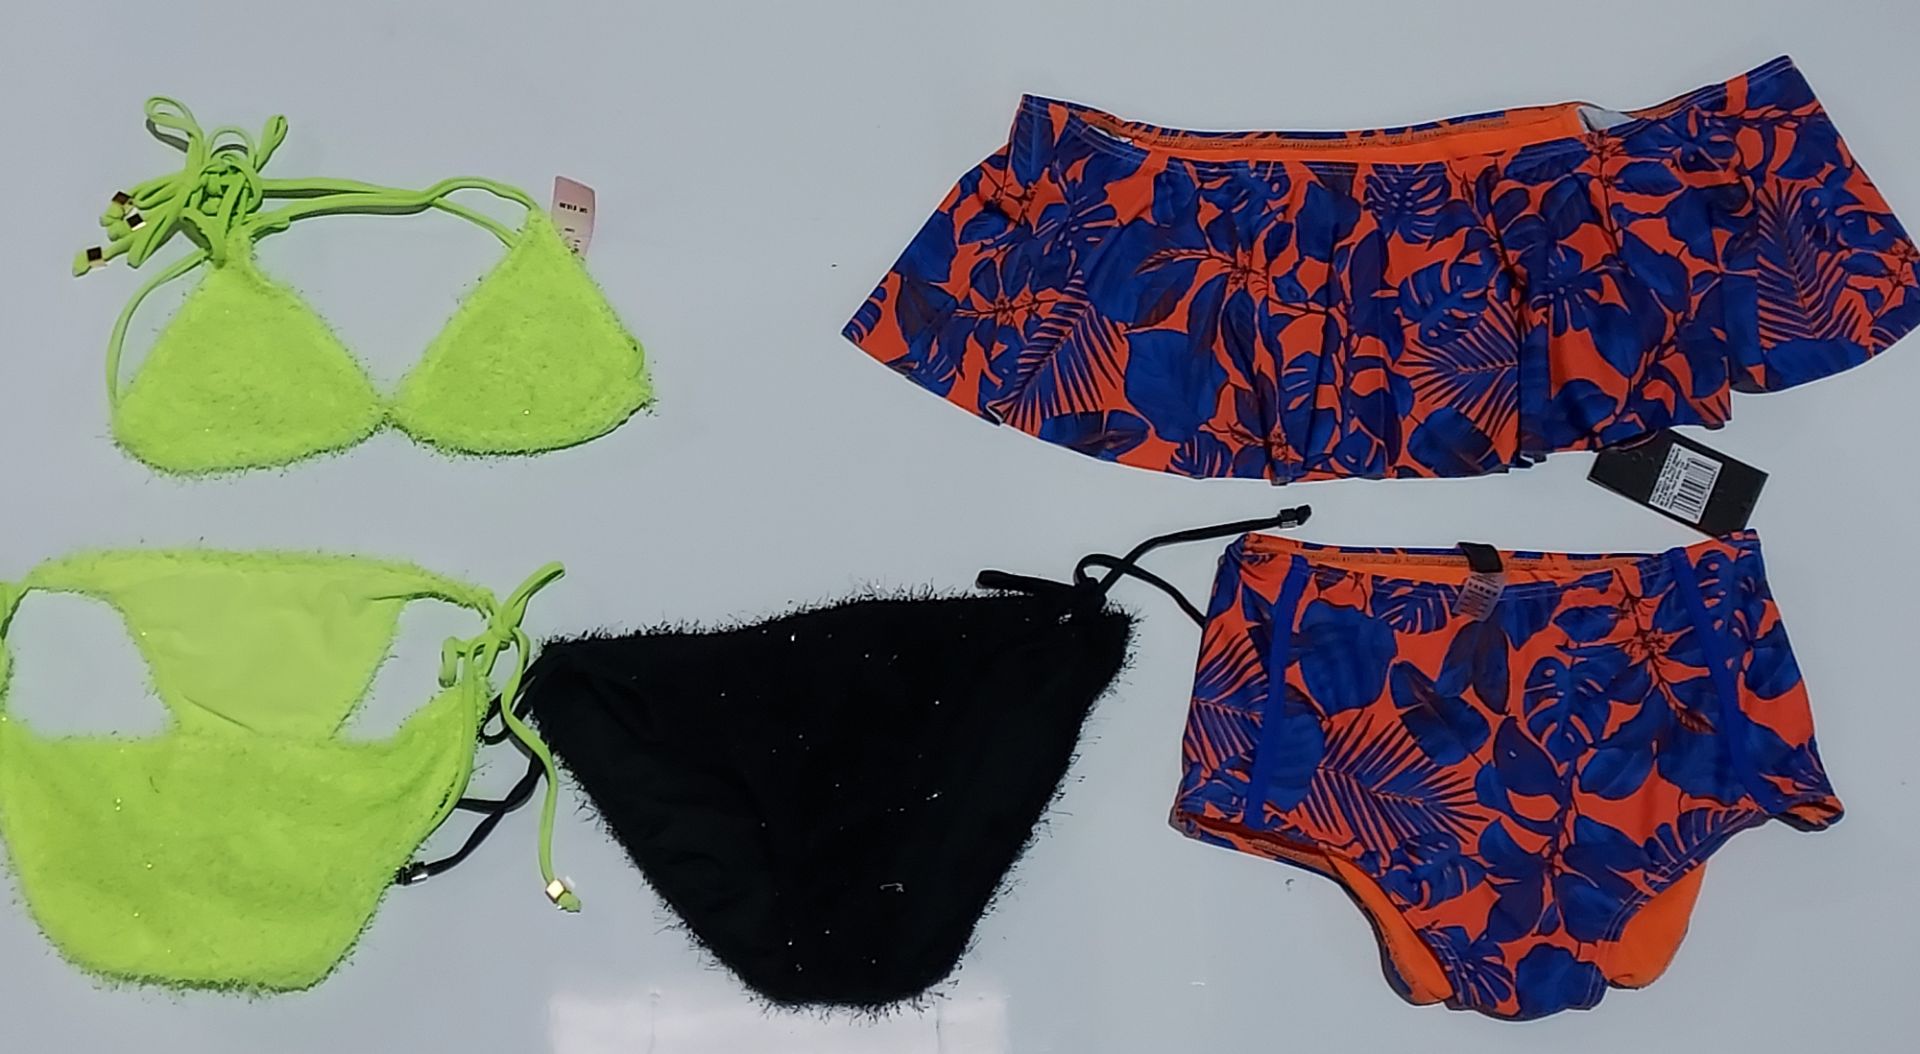 100 X BRAND NEW MIXED CLOTHING LOT CONTAINING SOUTH BEACH VICKY NEON PINK BIKINI TOPS / RIVER ISLAND